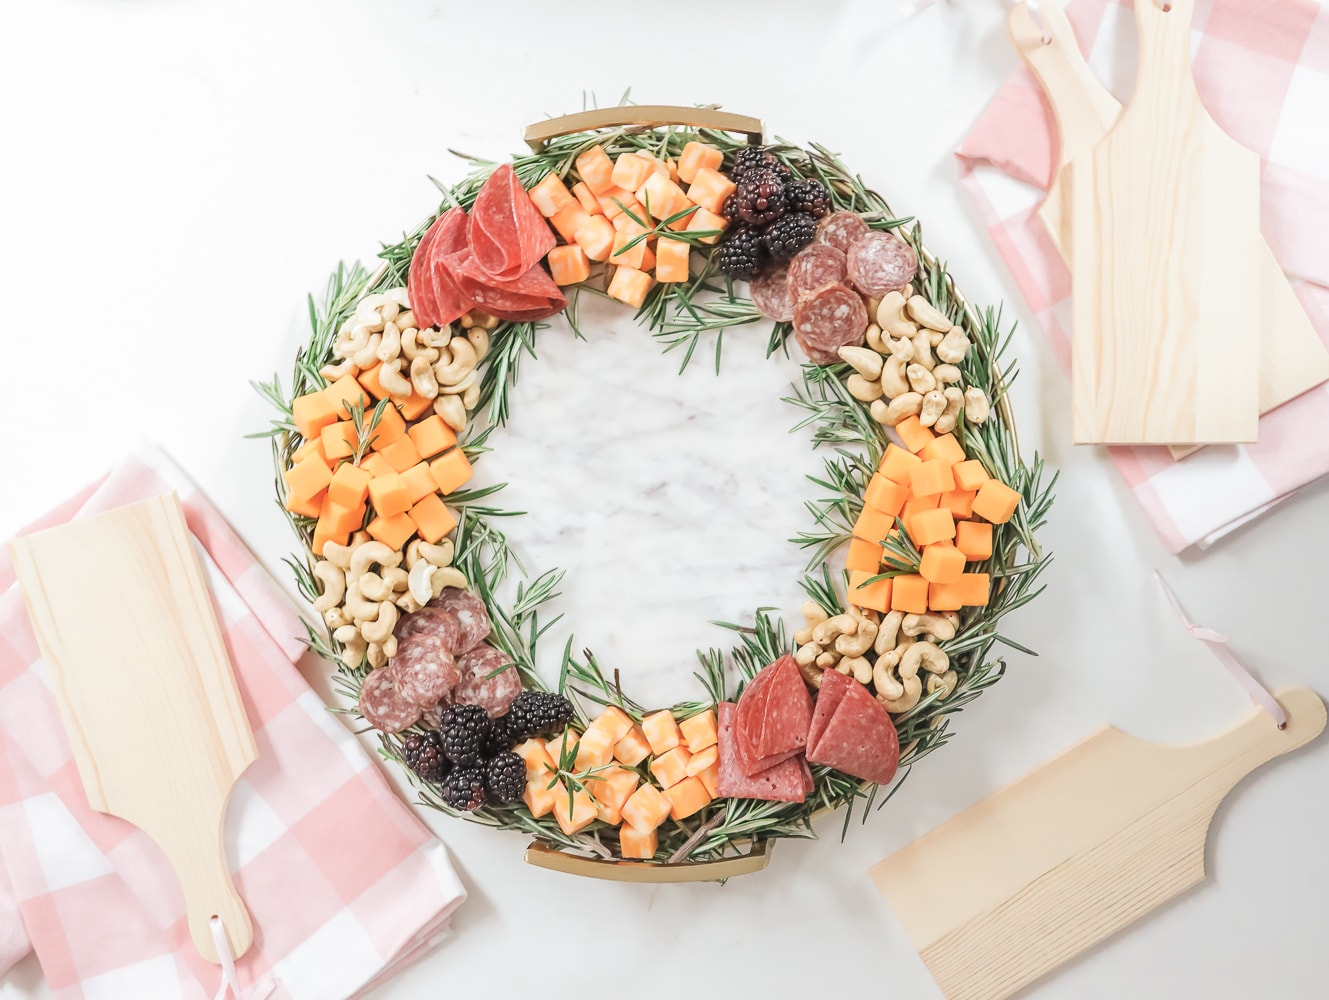 One of blogger Stephanie Ziajka's favorite Christmas cheese boards on Diary of a Debutante